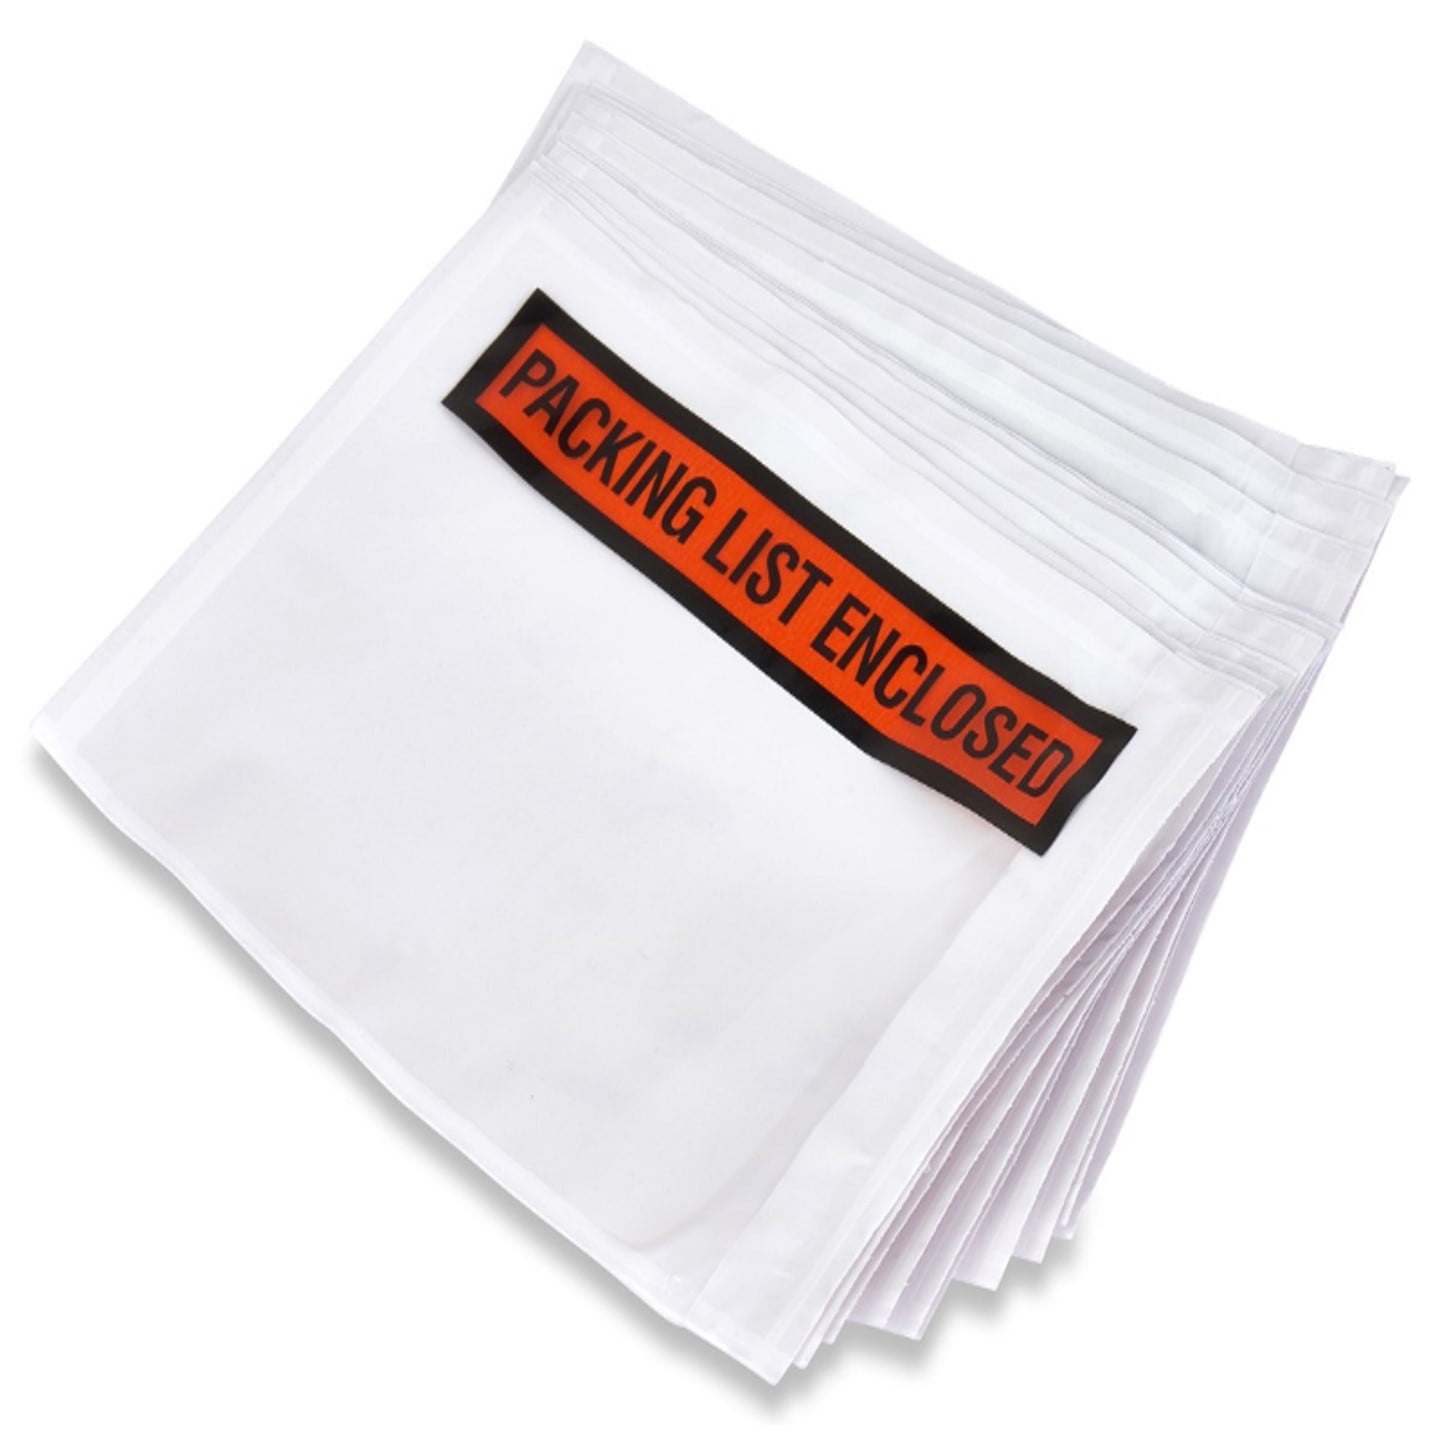 Adhesive Pouches for Invoice Packing Slip Back Side Document Loading Red Panel 2 mil Clear Plastic Bags Packaging. 100 Pack of Packing List Envelopes 7 x 5.5 Packing List Enclosed 7 x 1/2 